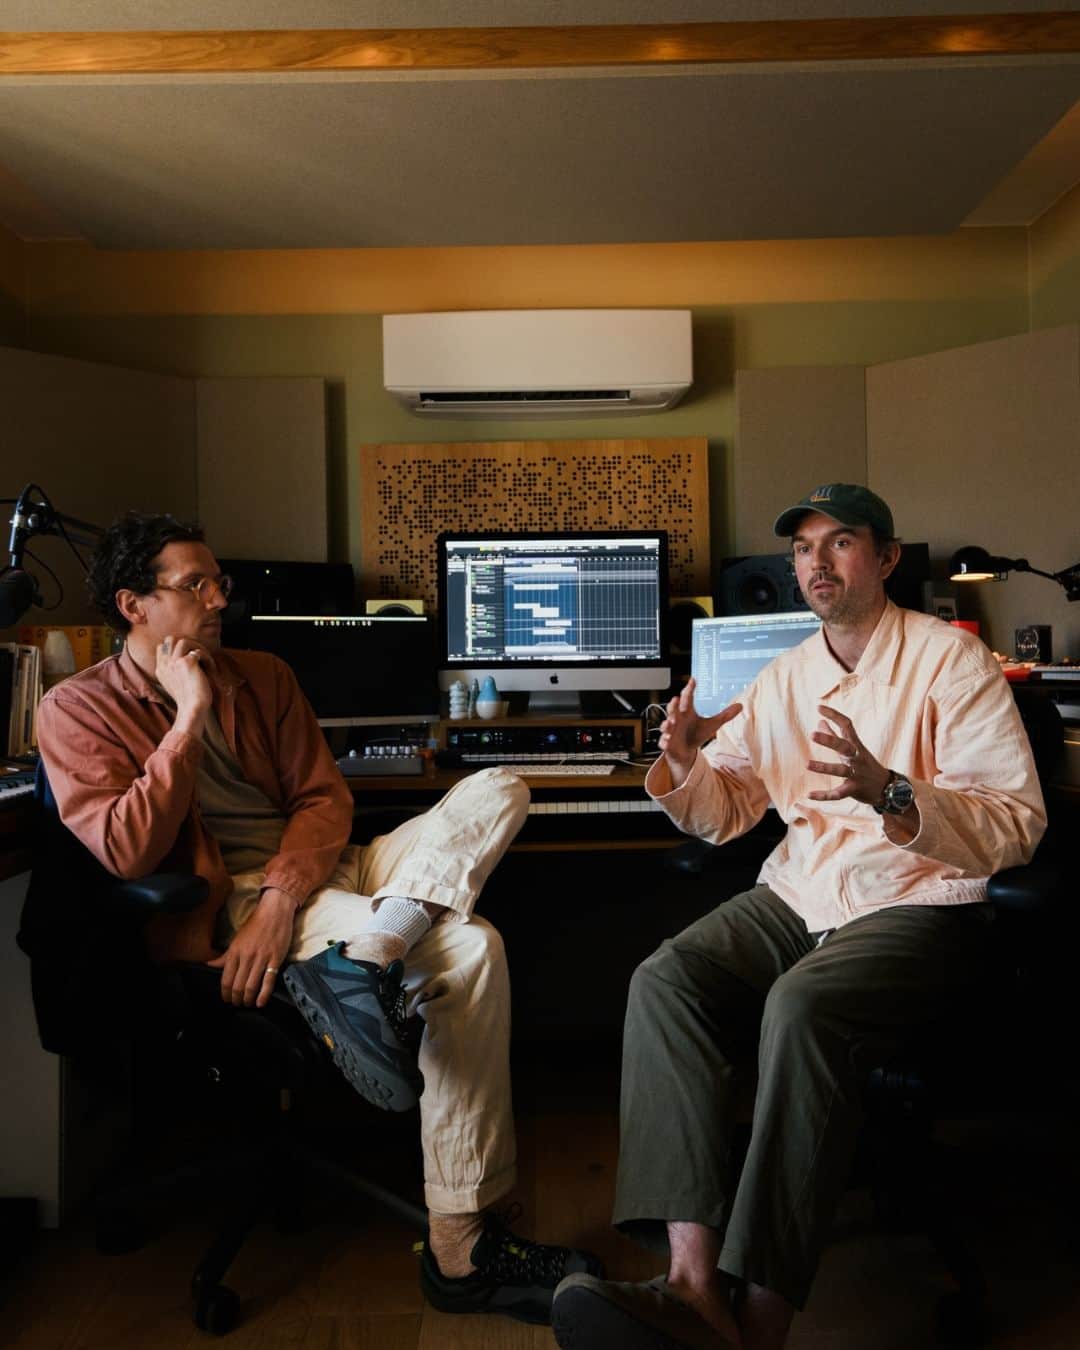 The Modern Houseのインスタグラム：「Back in their early twenties, when Freddie Webb and Joe Farley of Father Studio (@father_insta) first started making music together, their set-up was a lot more lo-fi than it is today. But their humble beginnings (in Freddie’s bedroom in his mum’s house) didn't prevent them from making music that resonated – ‘ideas over equipment’ is a mantra they still work by today.  Ideas and creativity are certainly what attracted us to working with them. That’s right, their latest client is The Modern House. We tasked the duo to come up with the music for our podcast, 'Homing In', and we couldn’t be happier with how they responded to an admittedly tricky brief.  Click the link in our bio to read more about Freddie and Joe's creative process and how they approached our new sonic identity.」